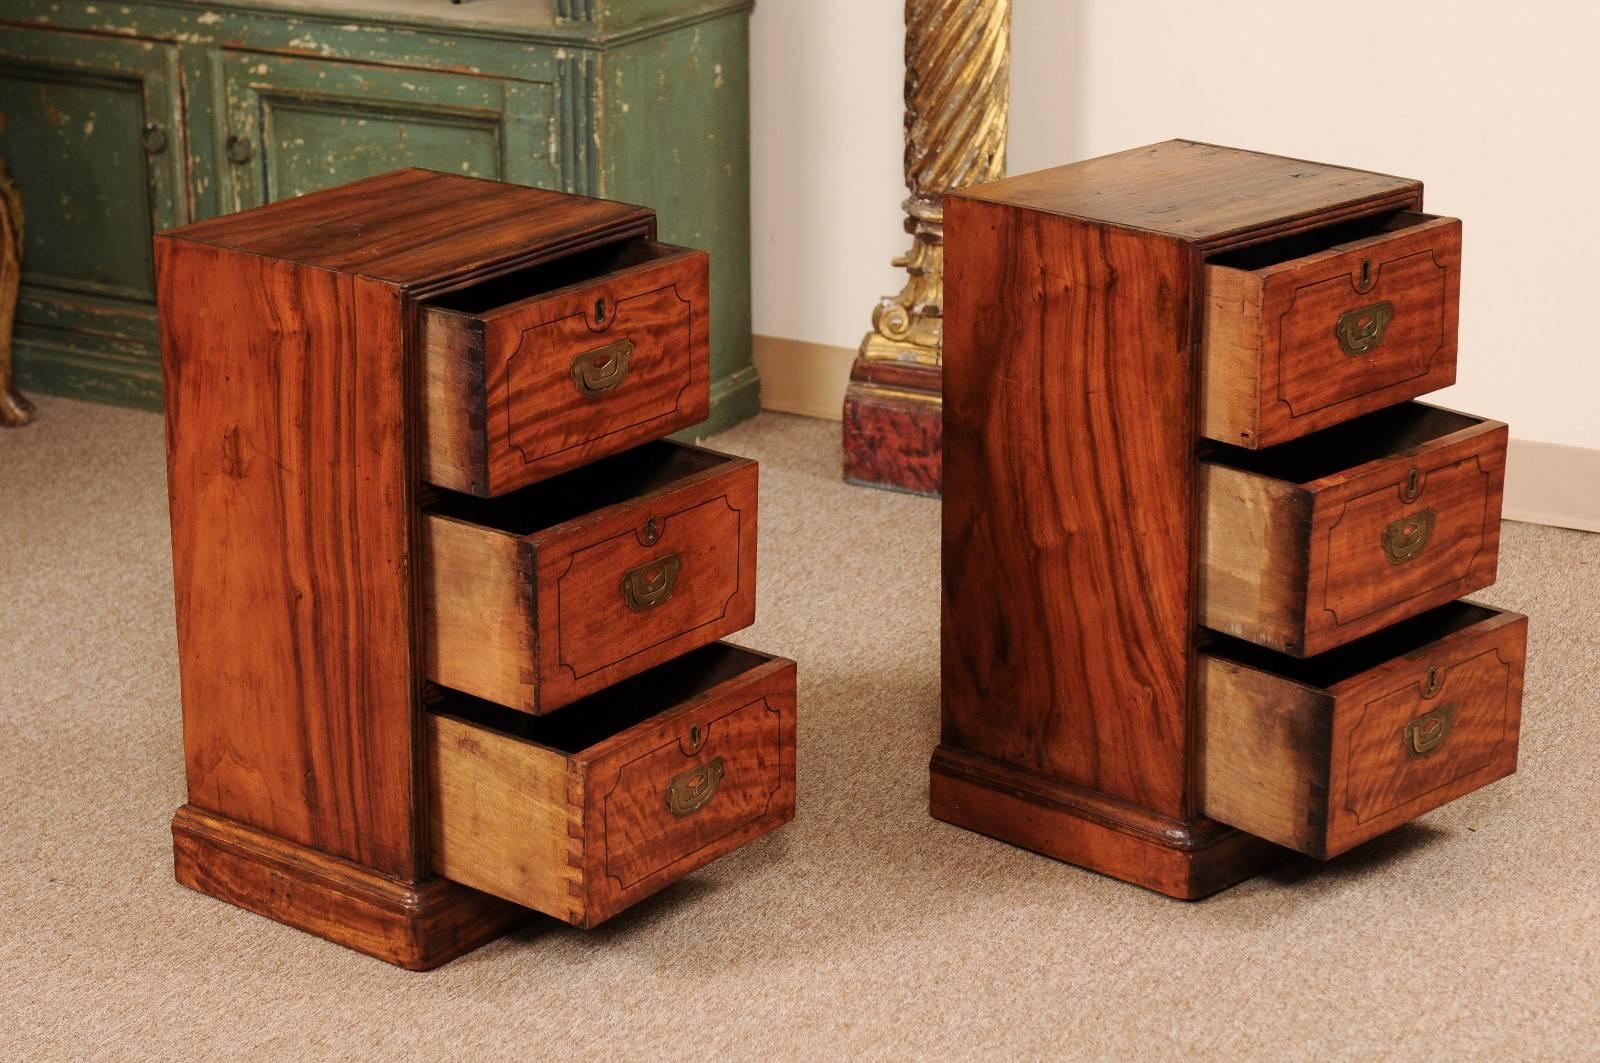 19th Century Pair of Campaign Style Bedside Tables in Mahogany with Three Drawers